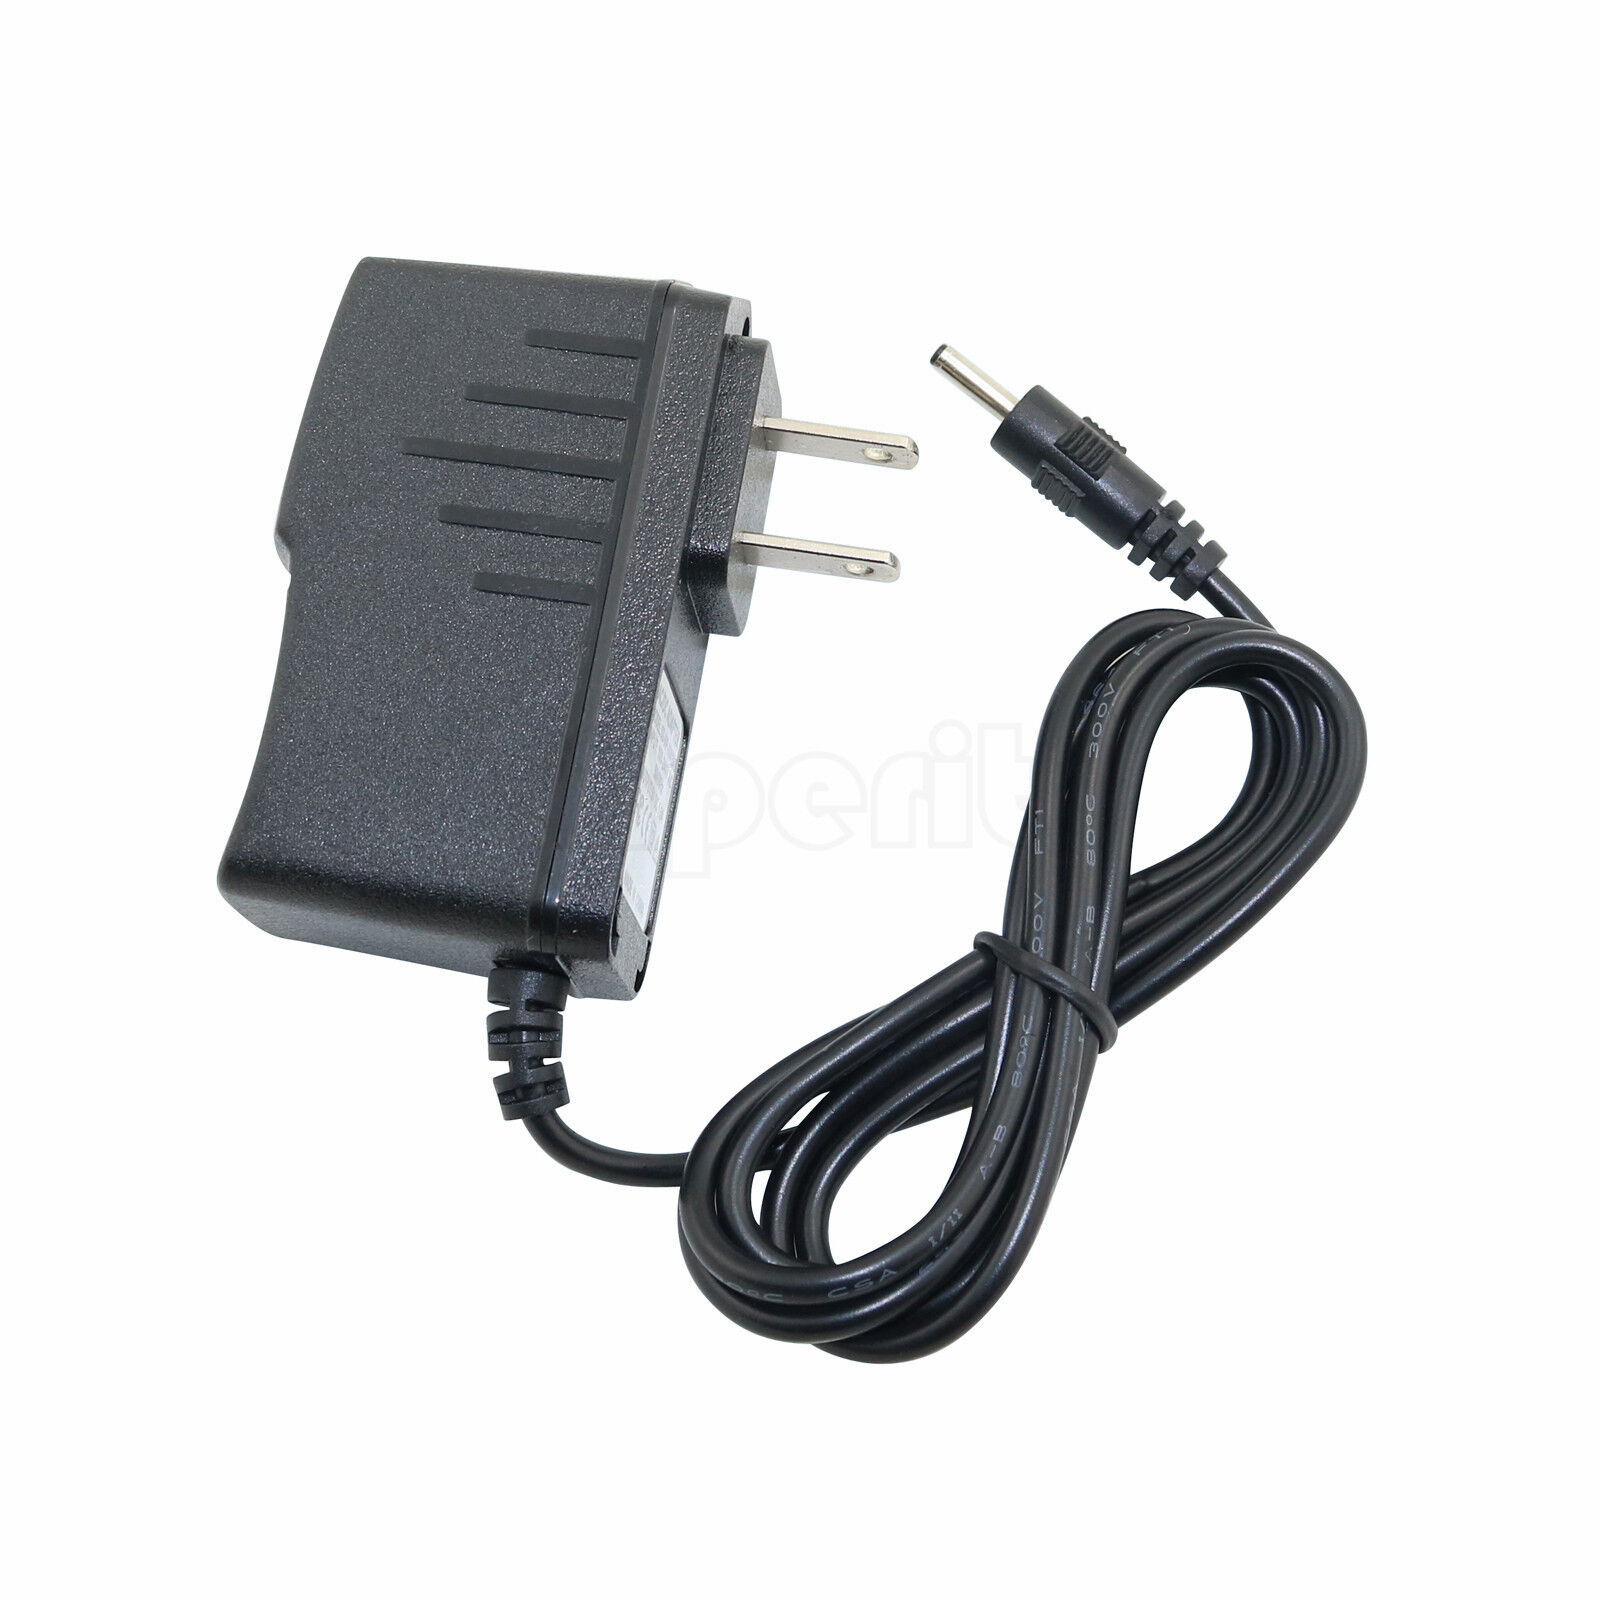 AC/DC Power Supply Adapter Wall Home Charger Cord For RCA 7" / 9" Tablet AC/DC Power Supply Adapter Wall Home Charger C